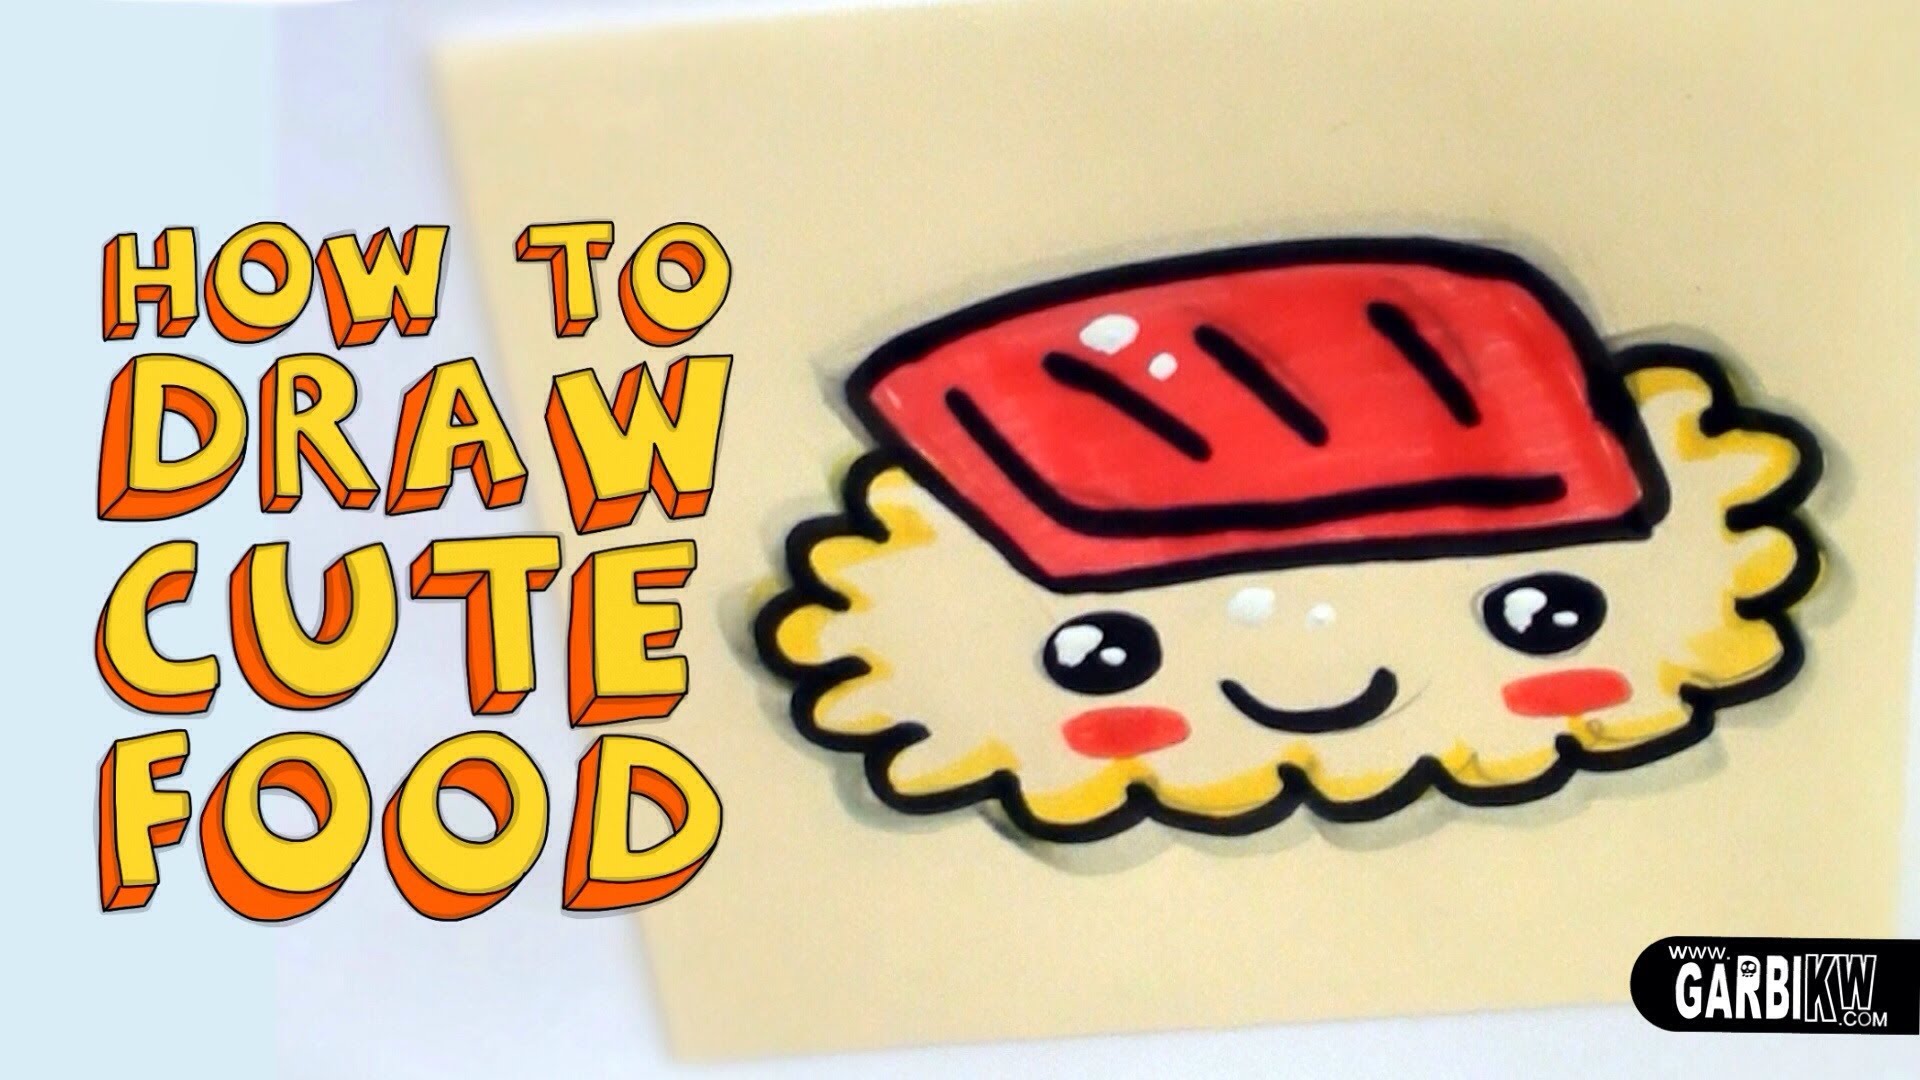 Draw A Cute Sushi Kawaii Food Easy Drawings By Garbi - Easy How To Draw A Cute Food - HD Wallpaper 